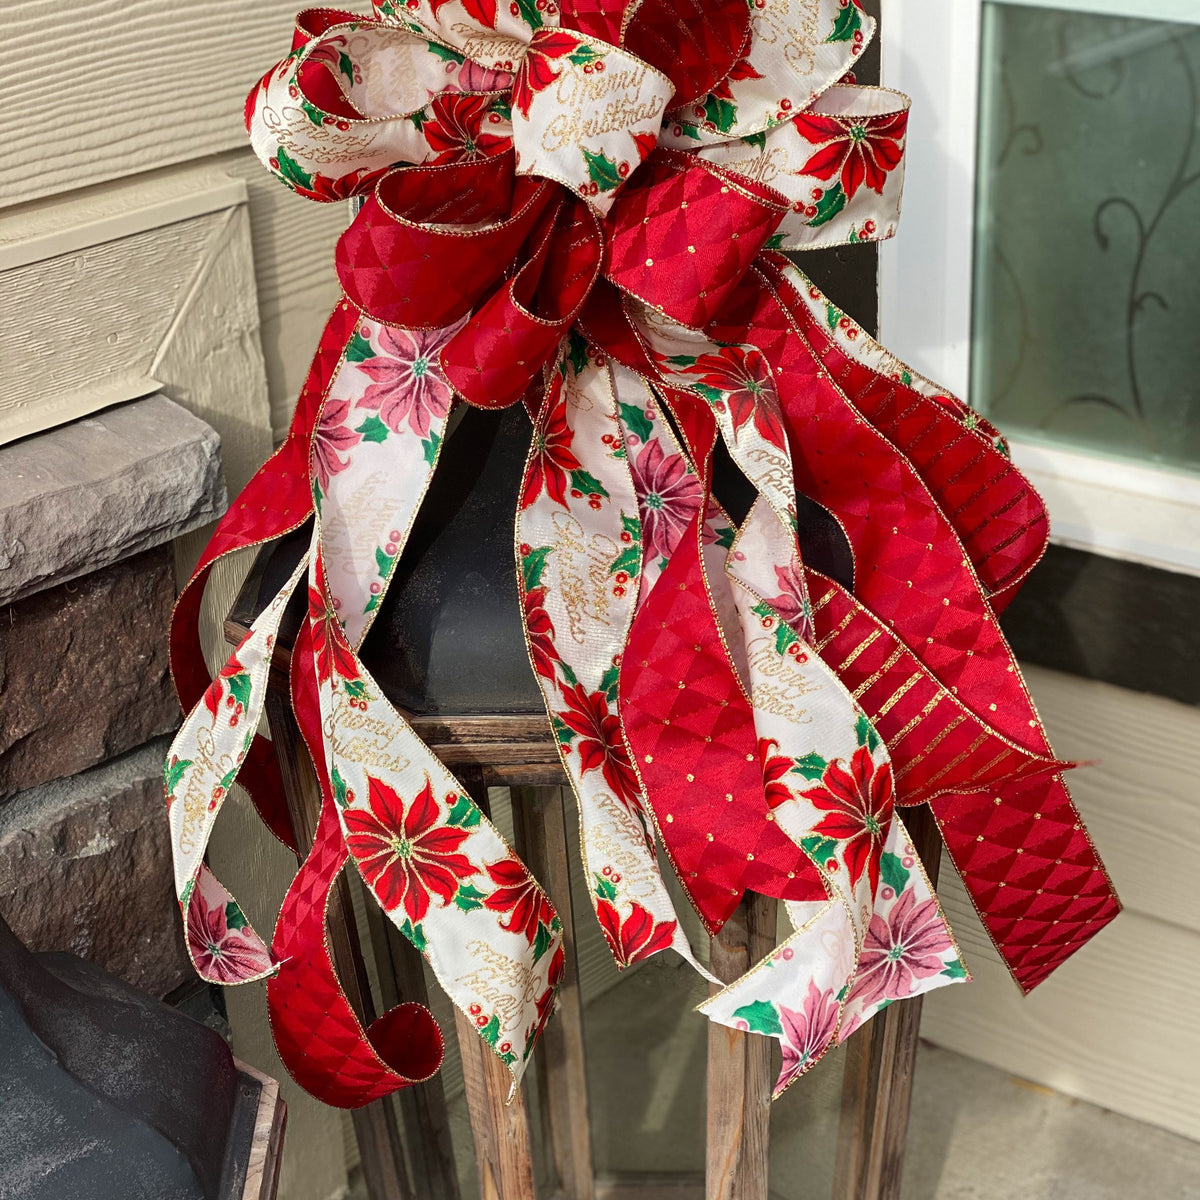 Large Custom Hand Bow Maker 3 Ribbon for Holiday Christmas Wreaths